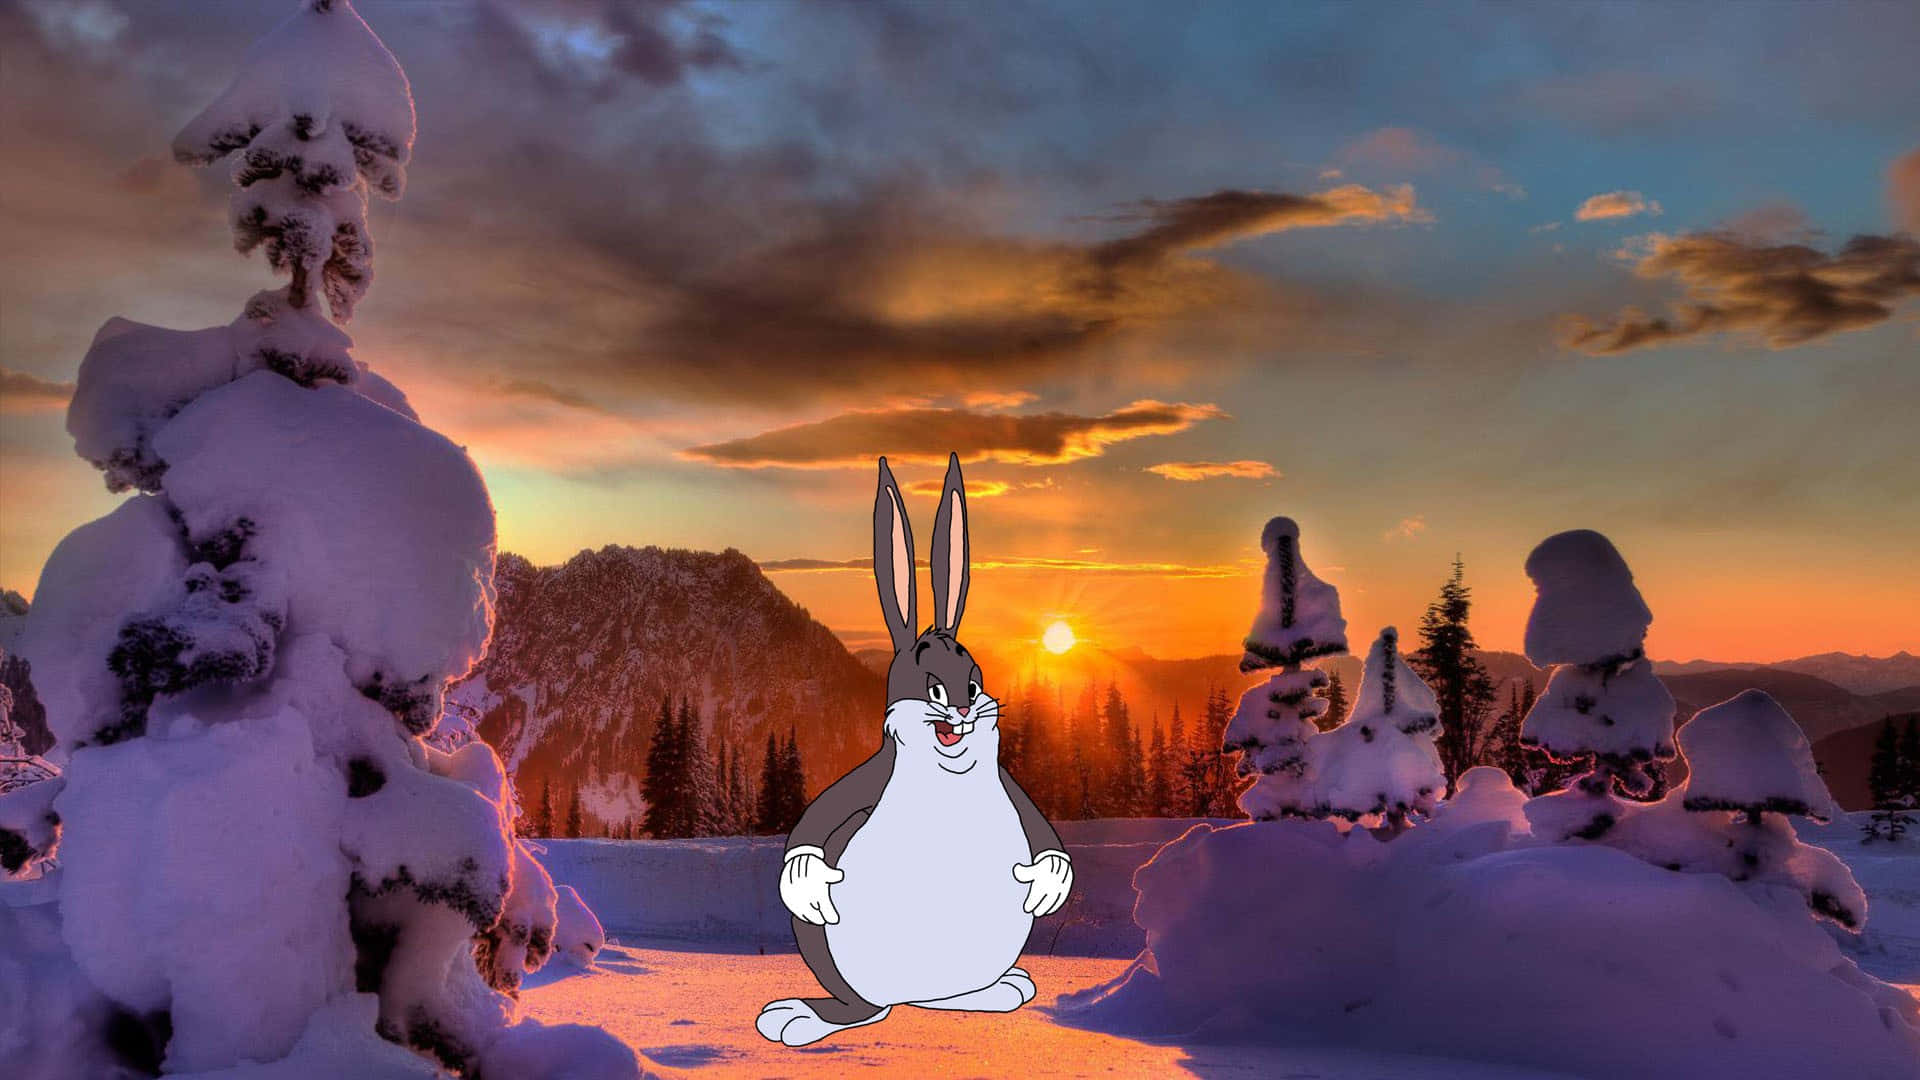 Image Big Chungus Greets You With Open Arms Background